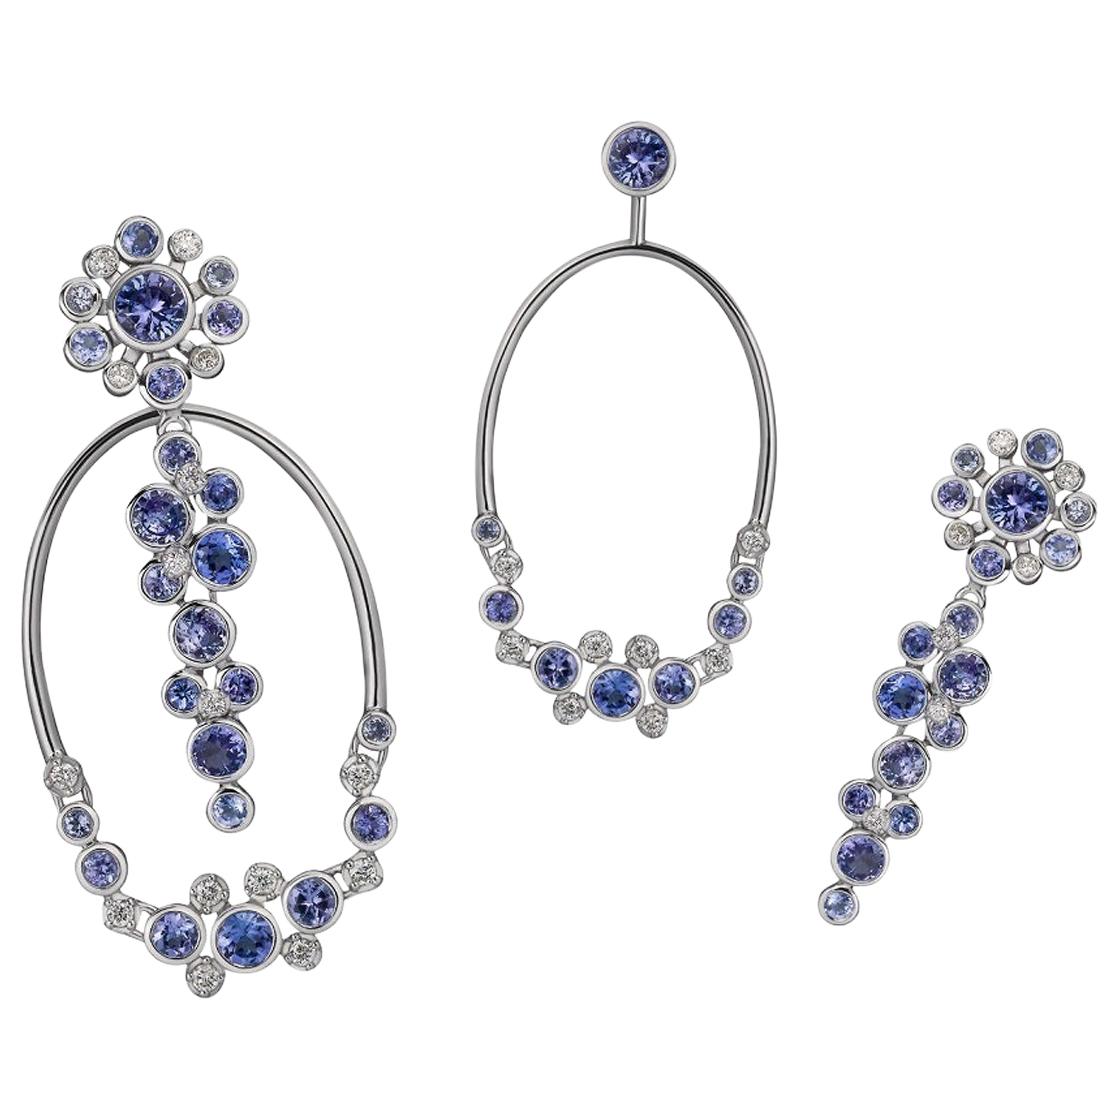 Interchangeable Constellation Earrings with Sapphires, Tanzanites and Diamonds